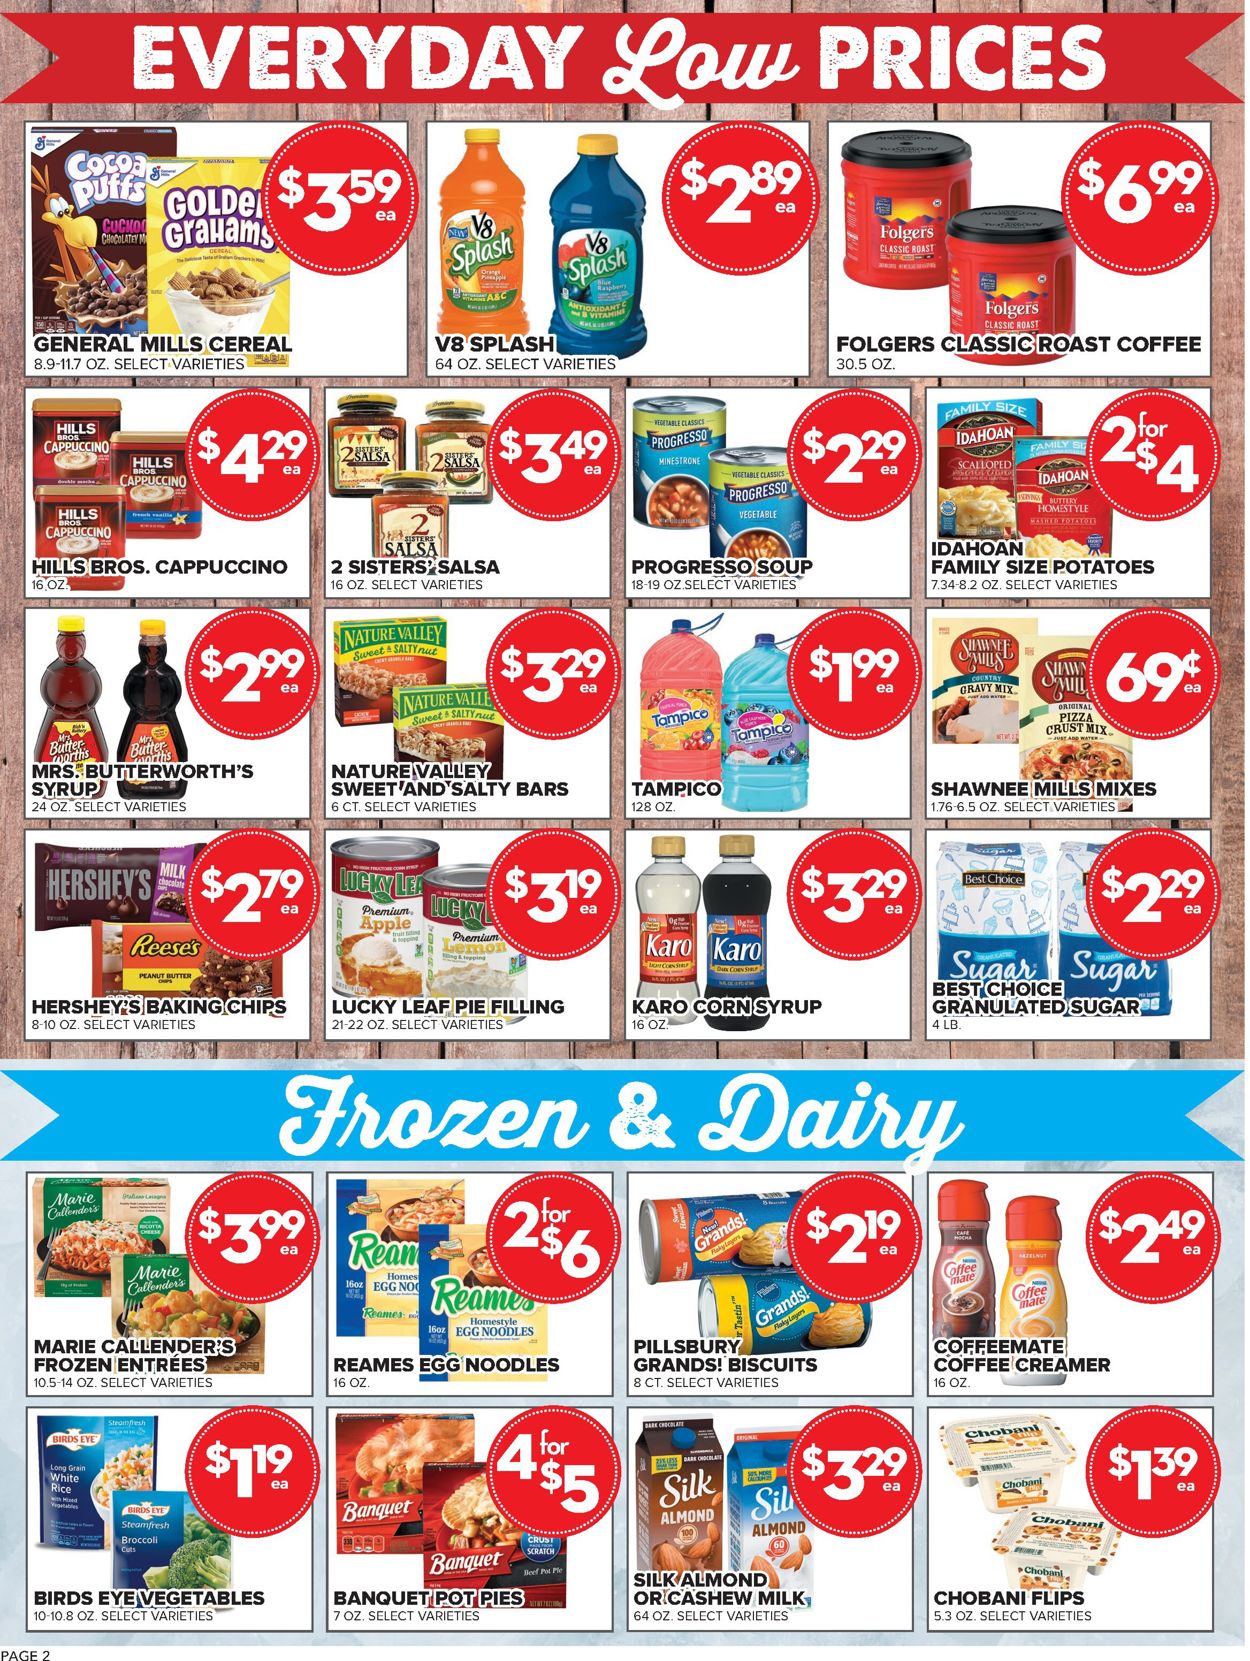 Price Cutter Halloween 2021 Weekly Ad Circular - valid 09/29-10/02/2021 (Page 2)